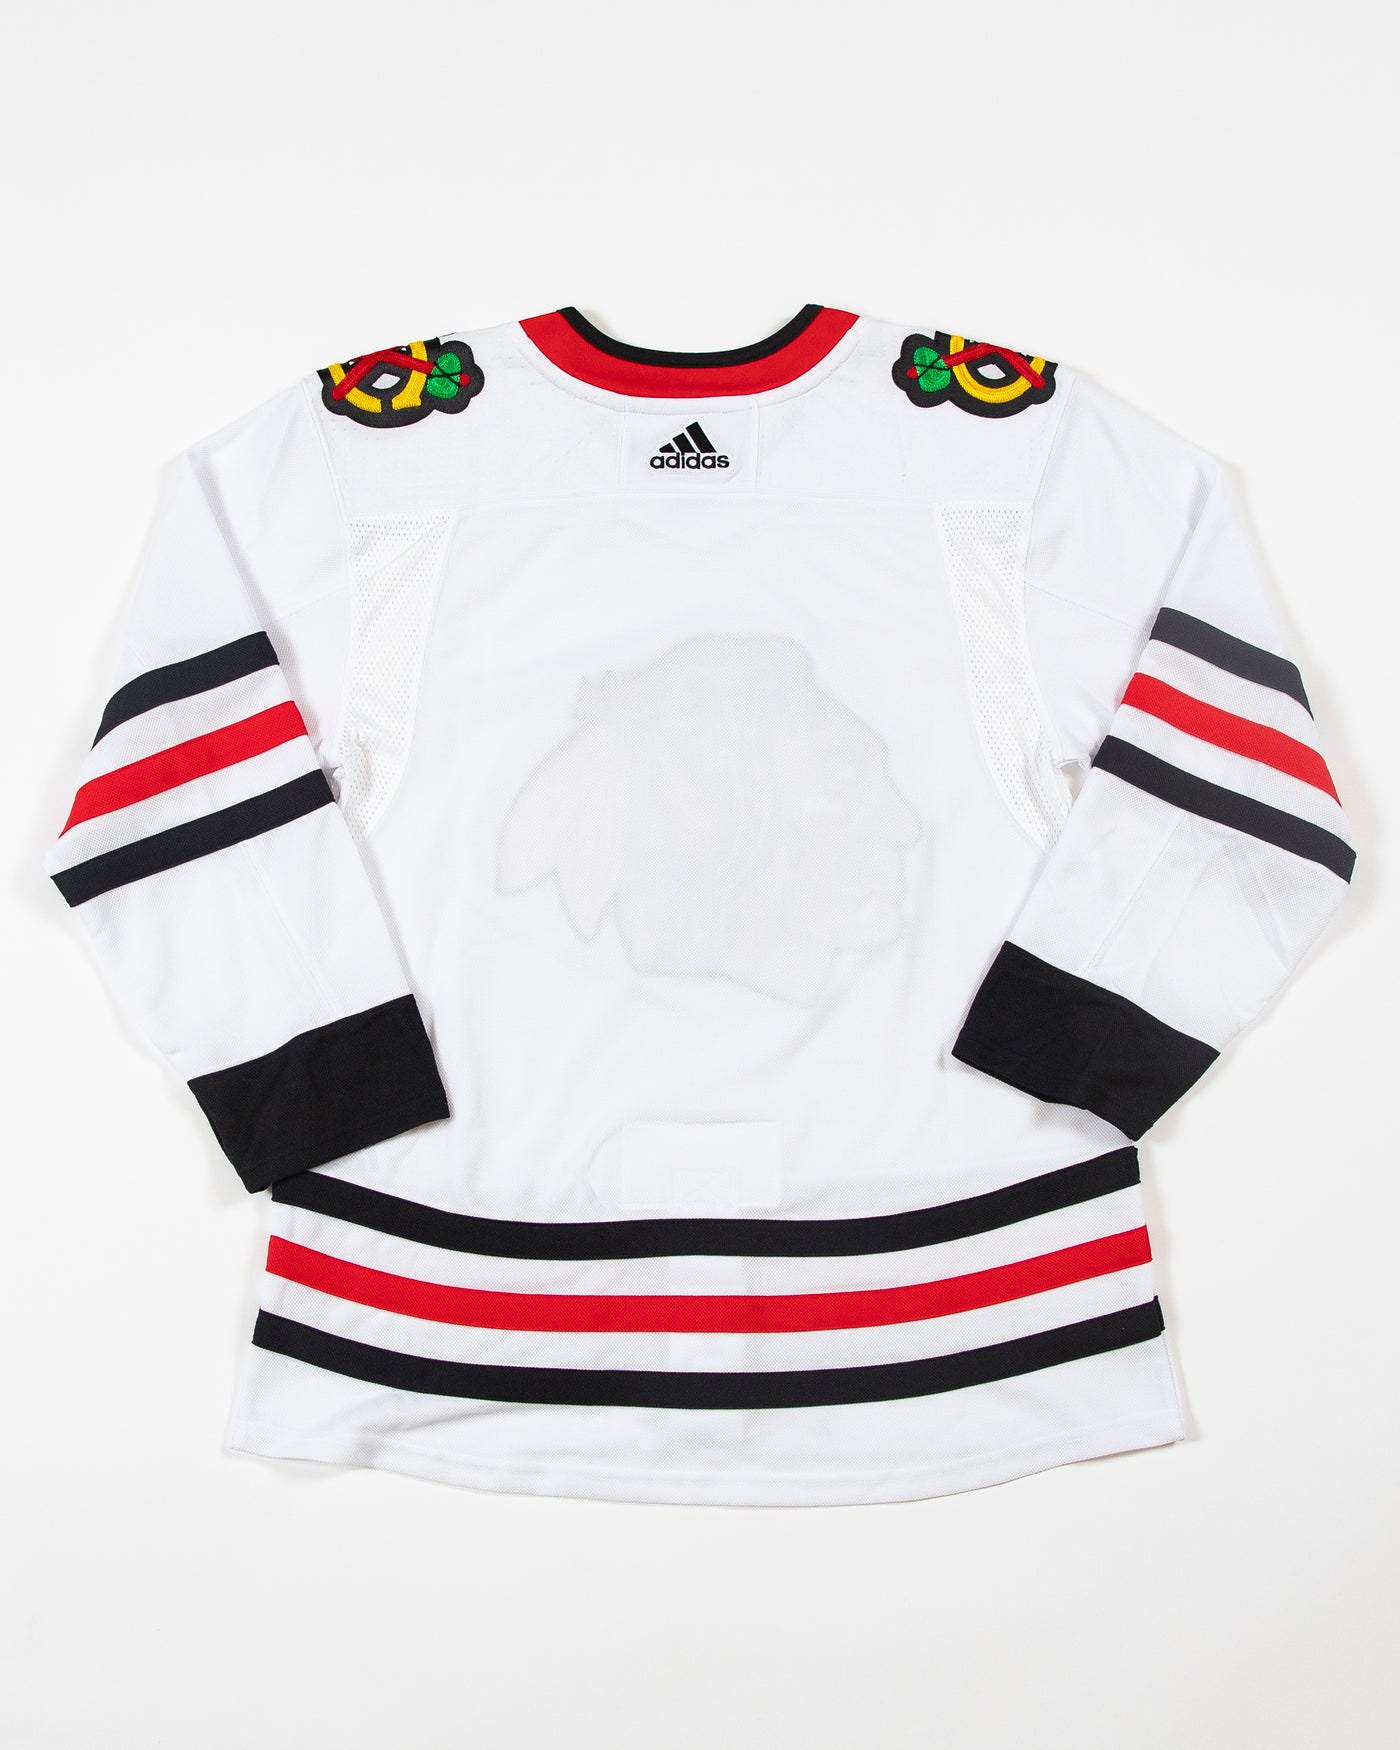 Adidas Authentic White Jersey